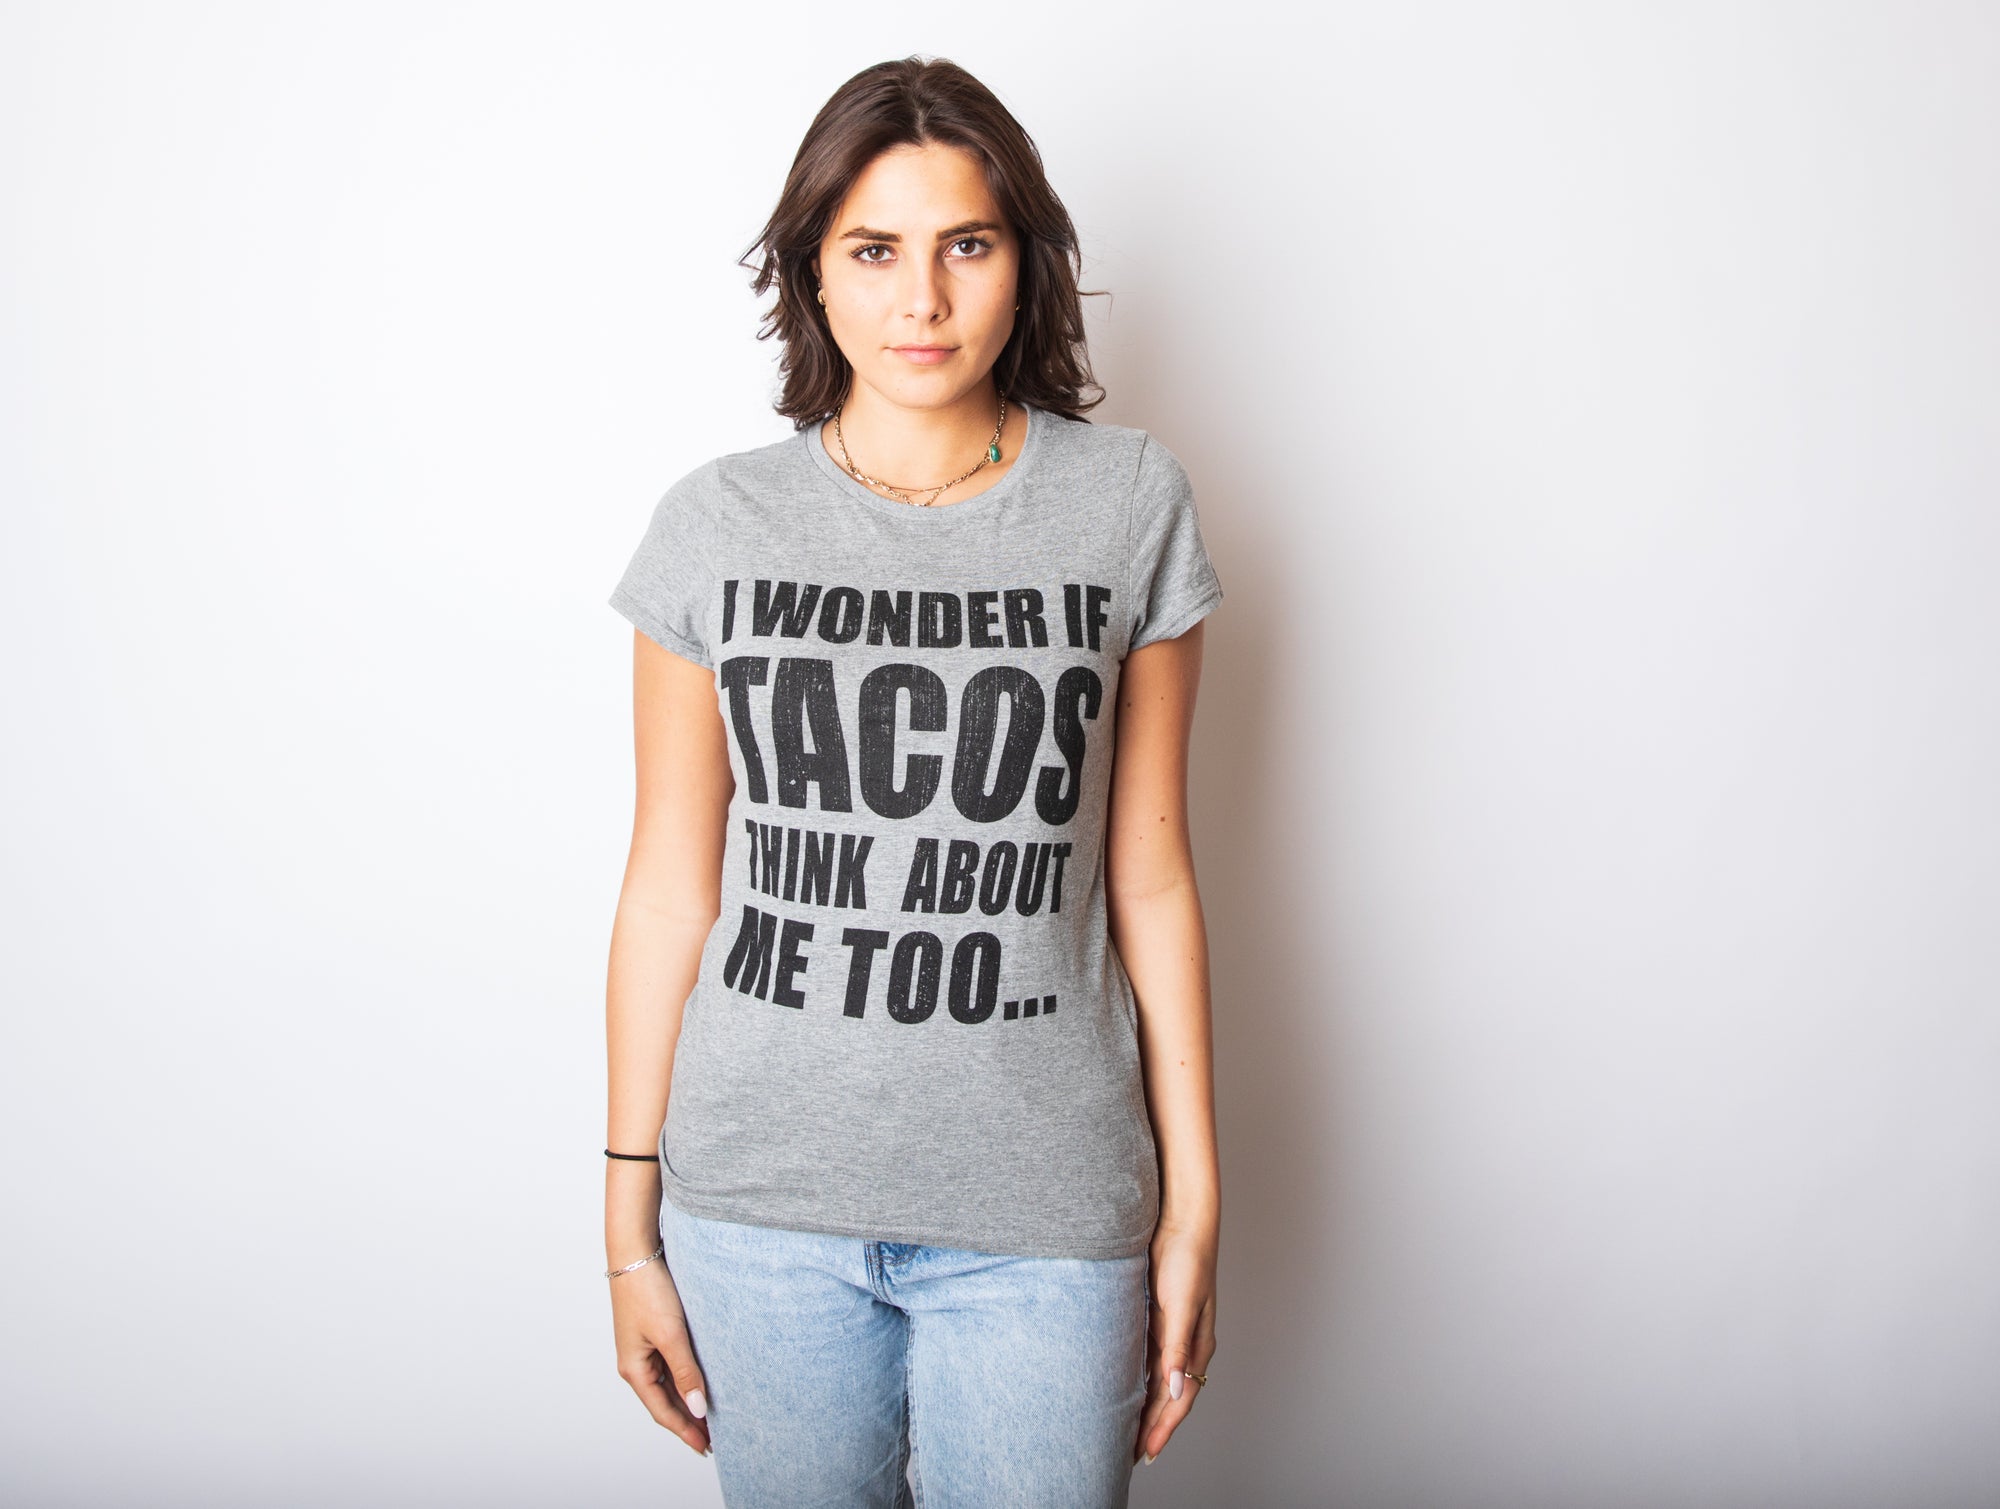 Funny Light Heather Grey I Wonder If Tacos Think About Me Too Womens T Shirt Nerdy Cinco De Mayo Food Tee